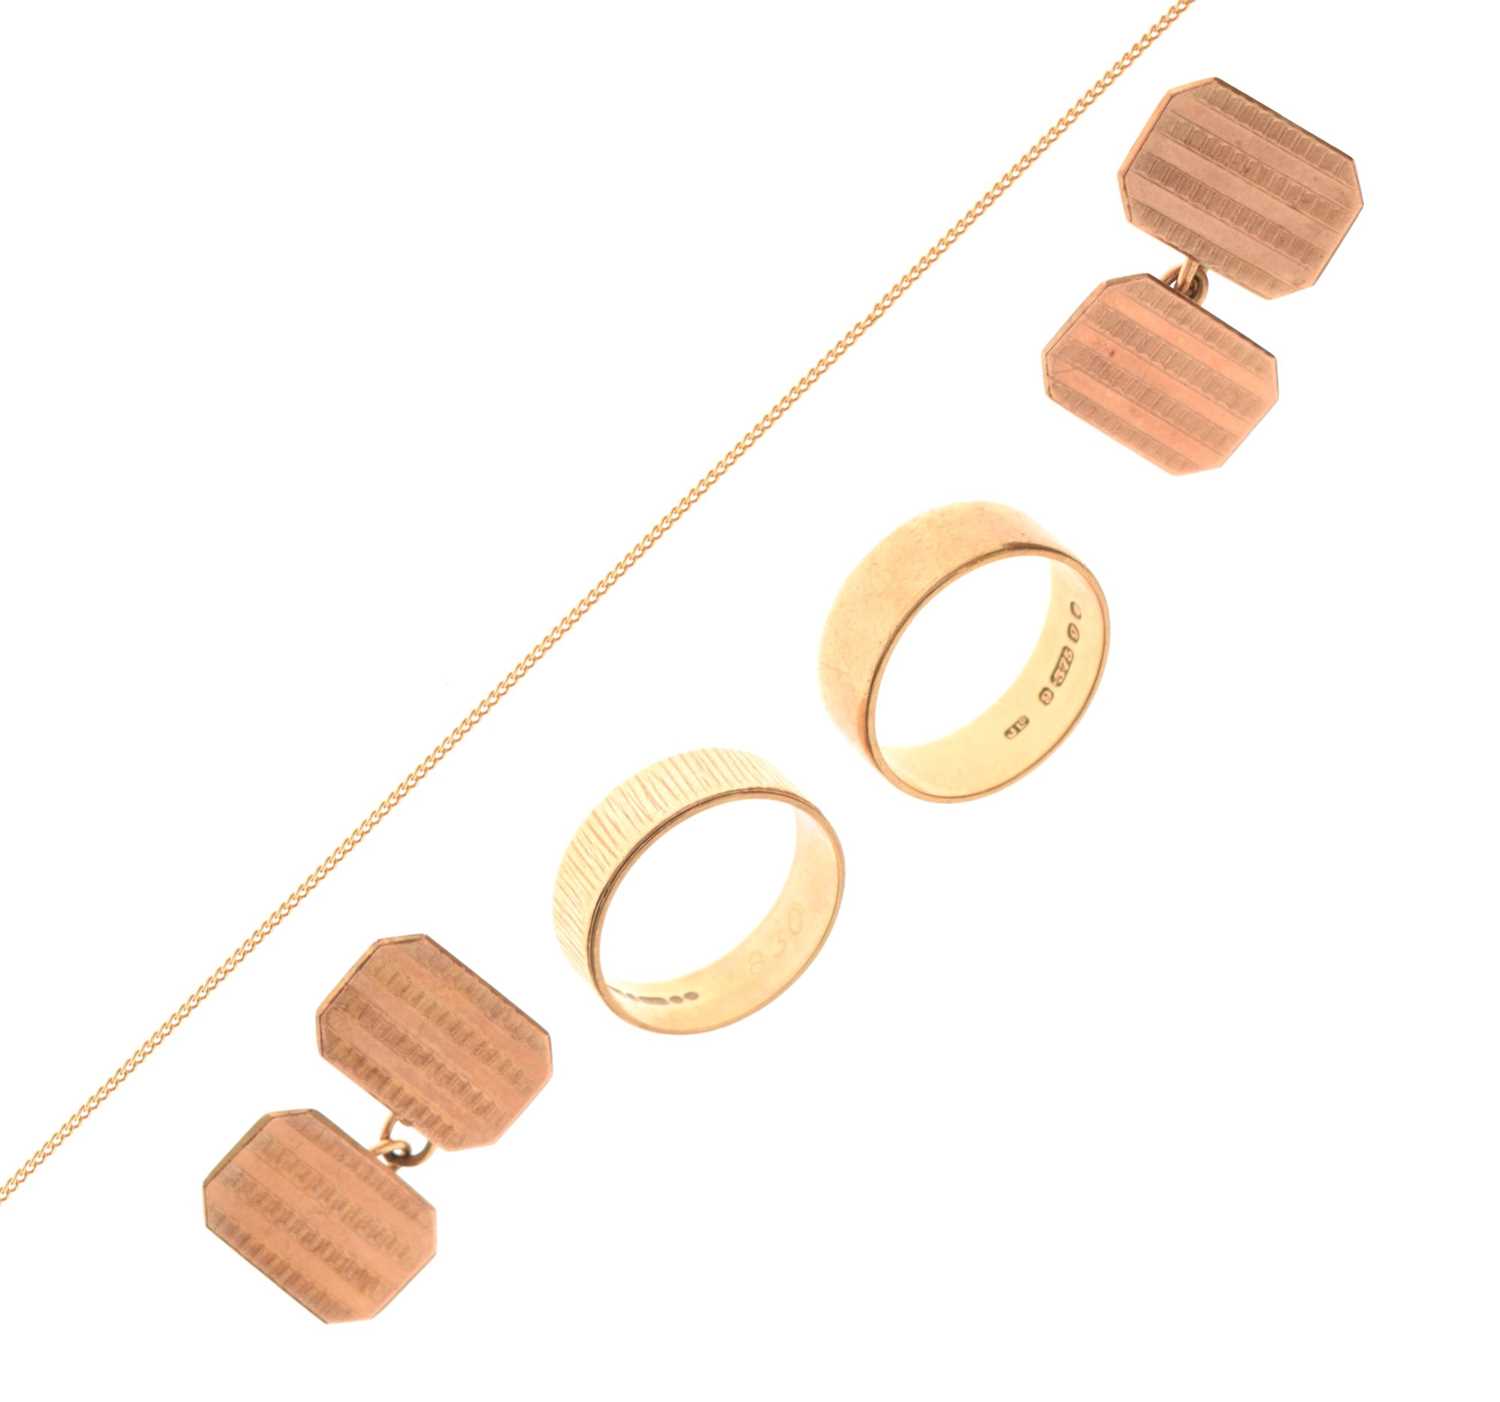 Two 9ct gold wedding bands, pair of 9ct cufflinks, and other gold jewellery - Image 8 of 14